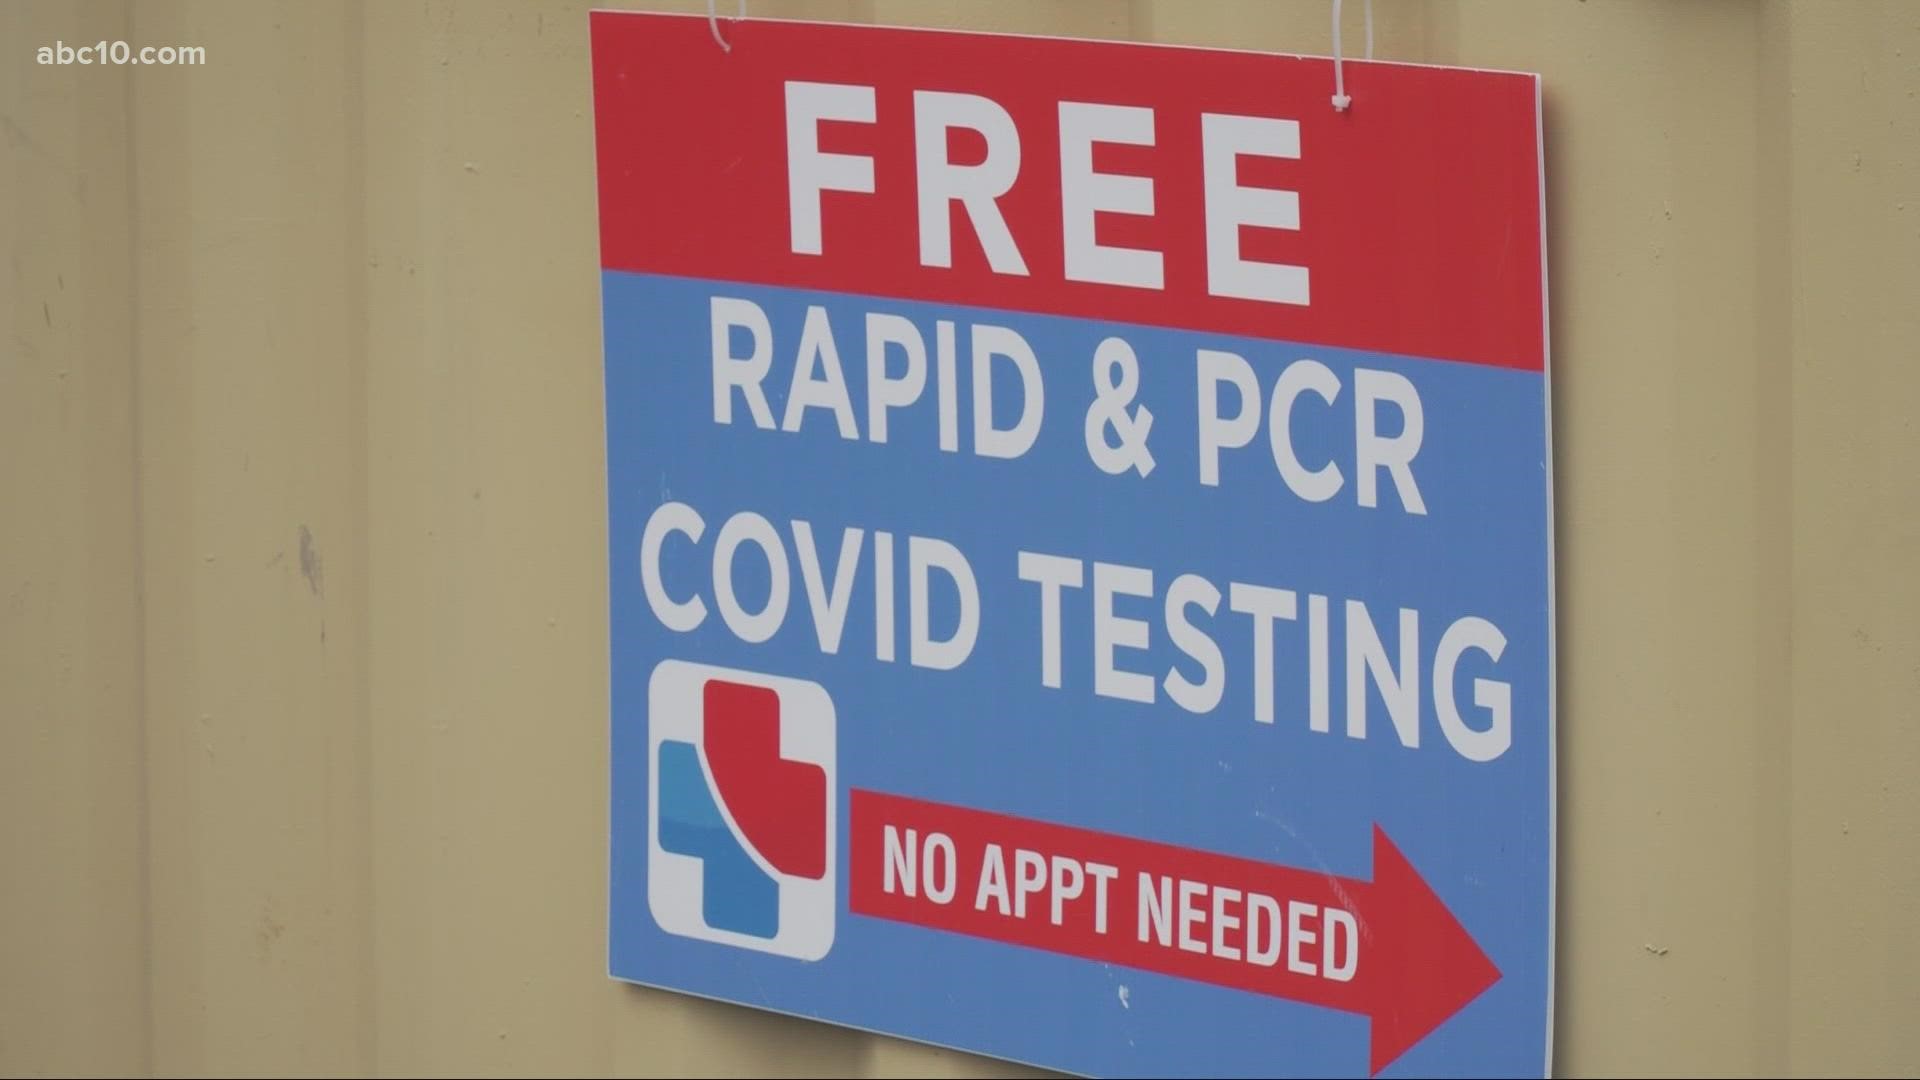 Consumer safety experts offer advice to ensure patients are protected when they seek a COVID-19 test.